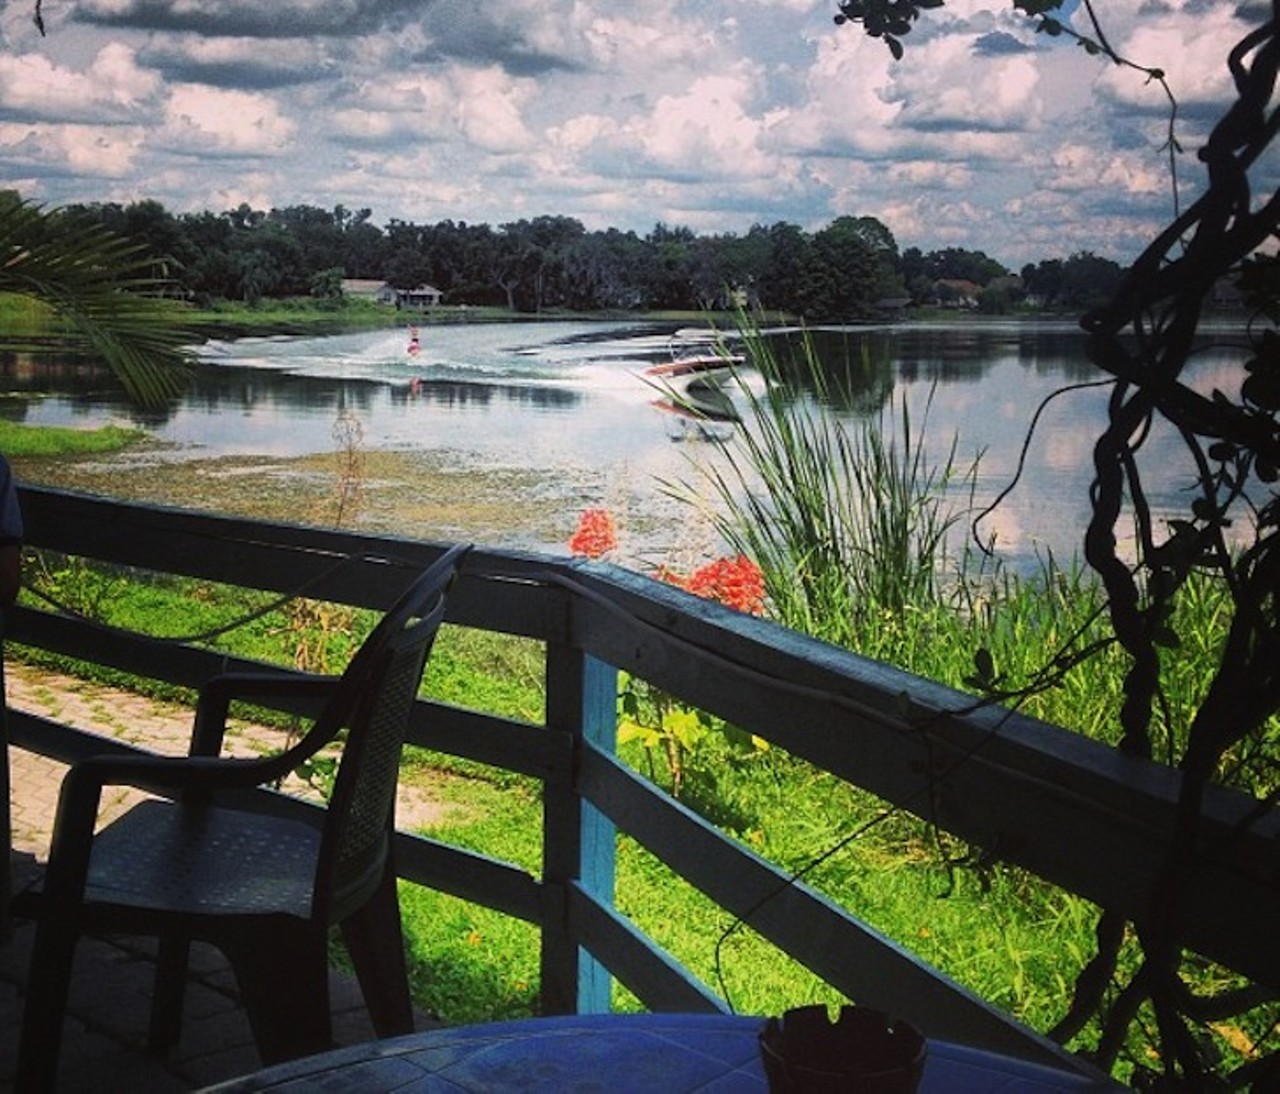 Julie's Waterfront
The Holden Heights restaurant has long been a casual mainstay for couples looking for a low-key way to spend a sunset. The deck overlooks Lake Jennie Jewel, and reservations aren&#146;t required to score a waterfront table and a &#147;Land and Sea&#148; combo.
Photo via pounsignlb on Instagram